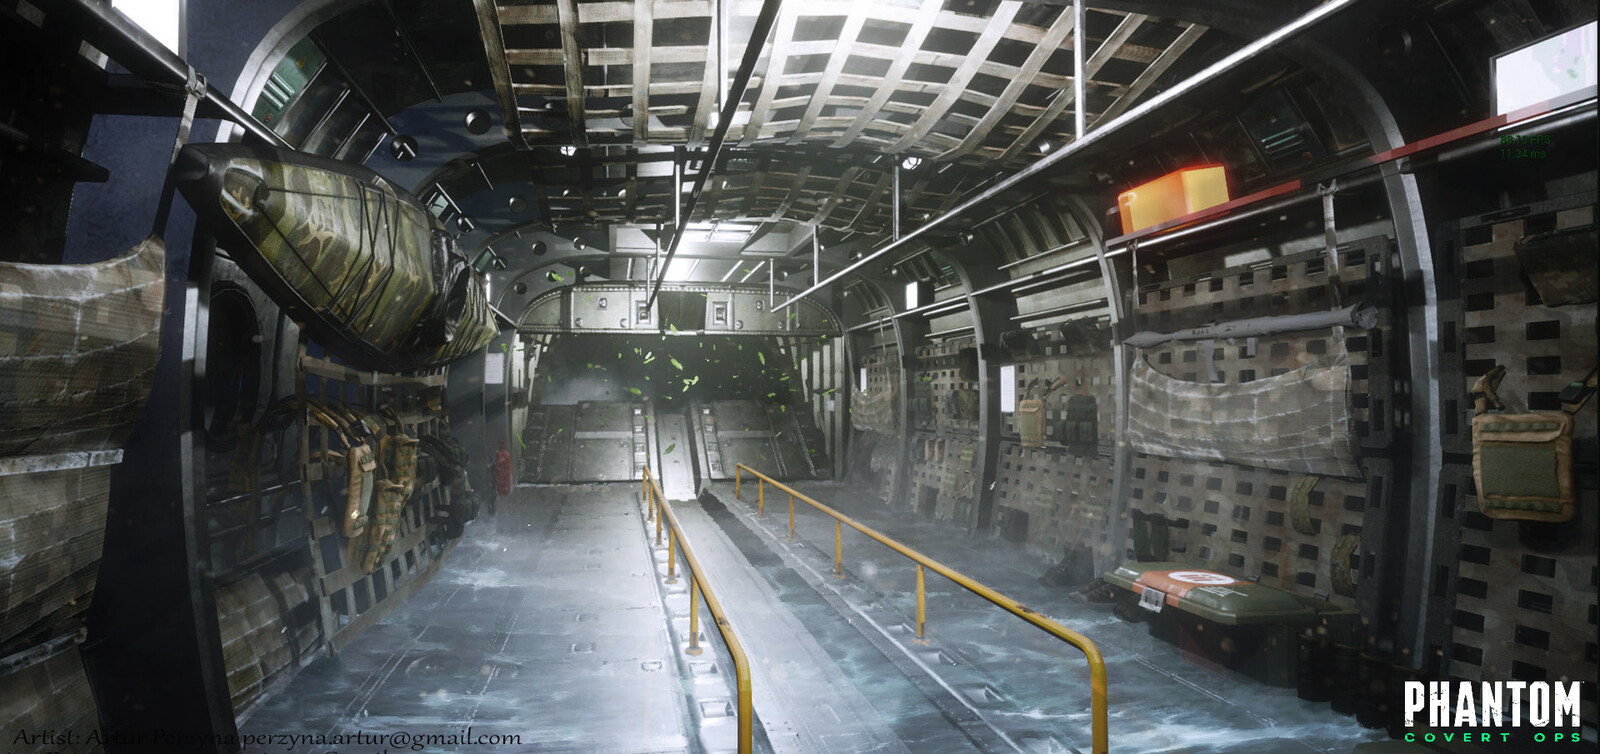 Chinook Helicopter, Unreal 4
Game startup enviro in Phantom: Covert ops